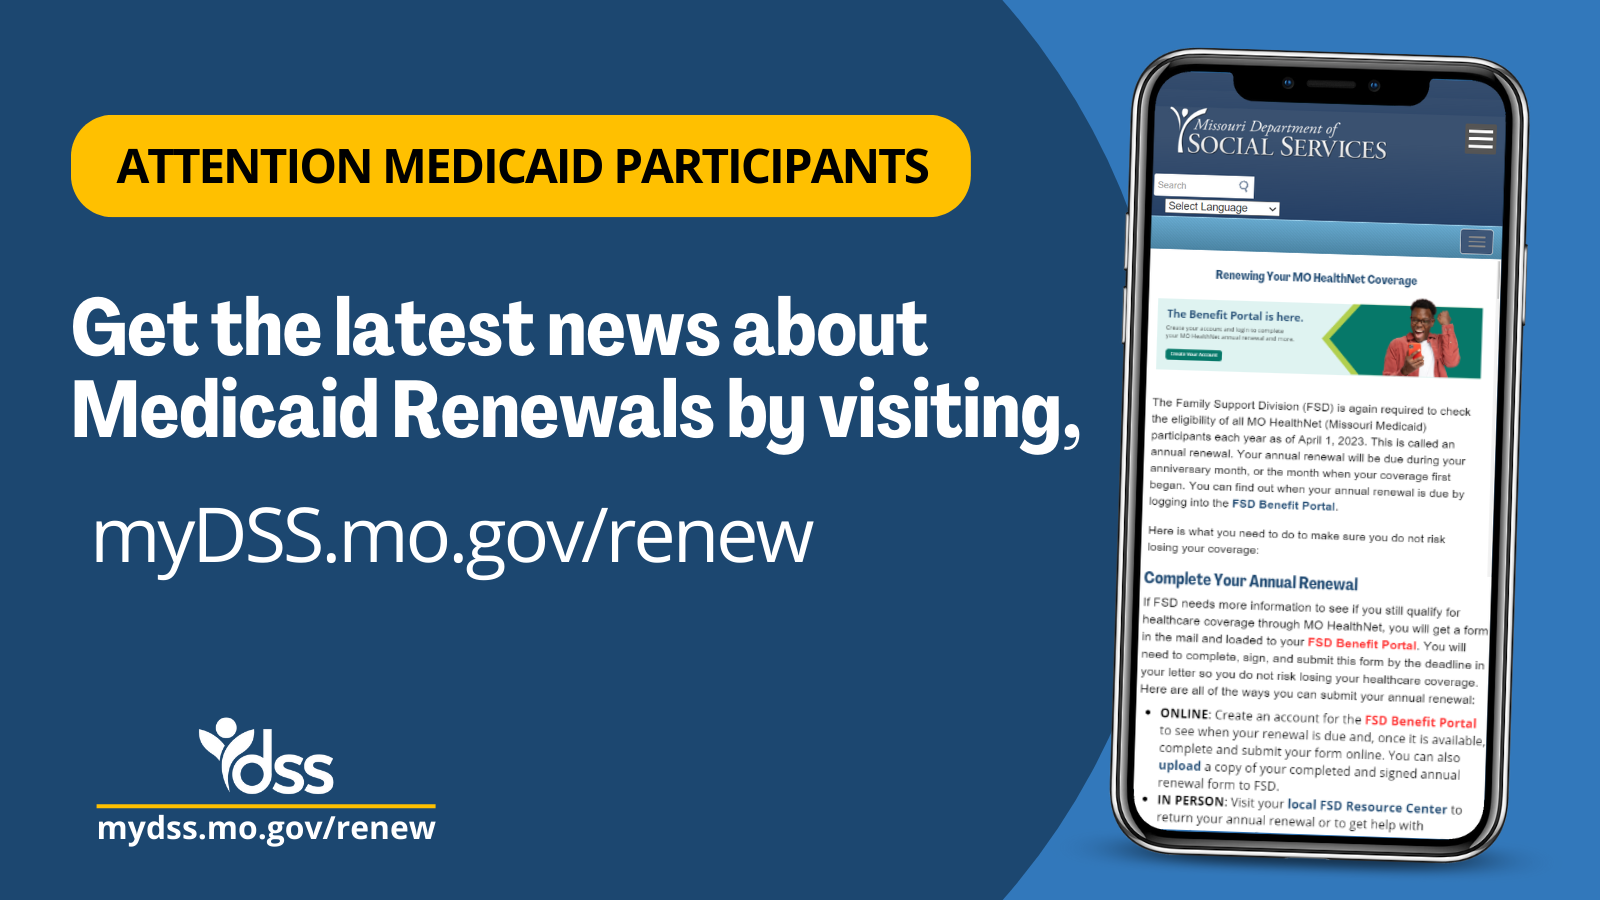 Get the latest news about Medicaid Renewals